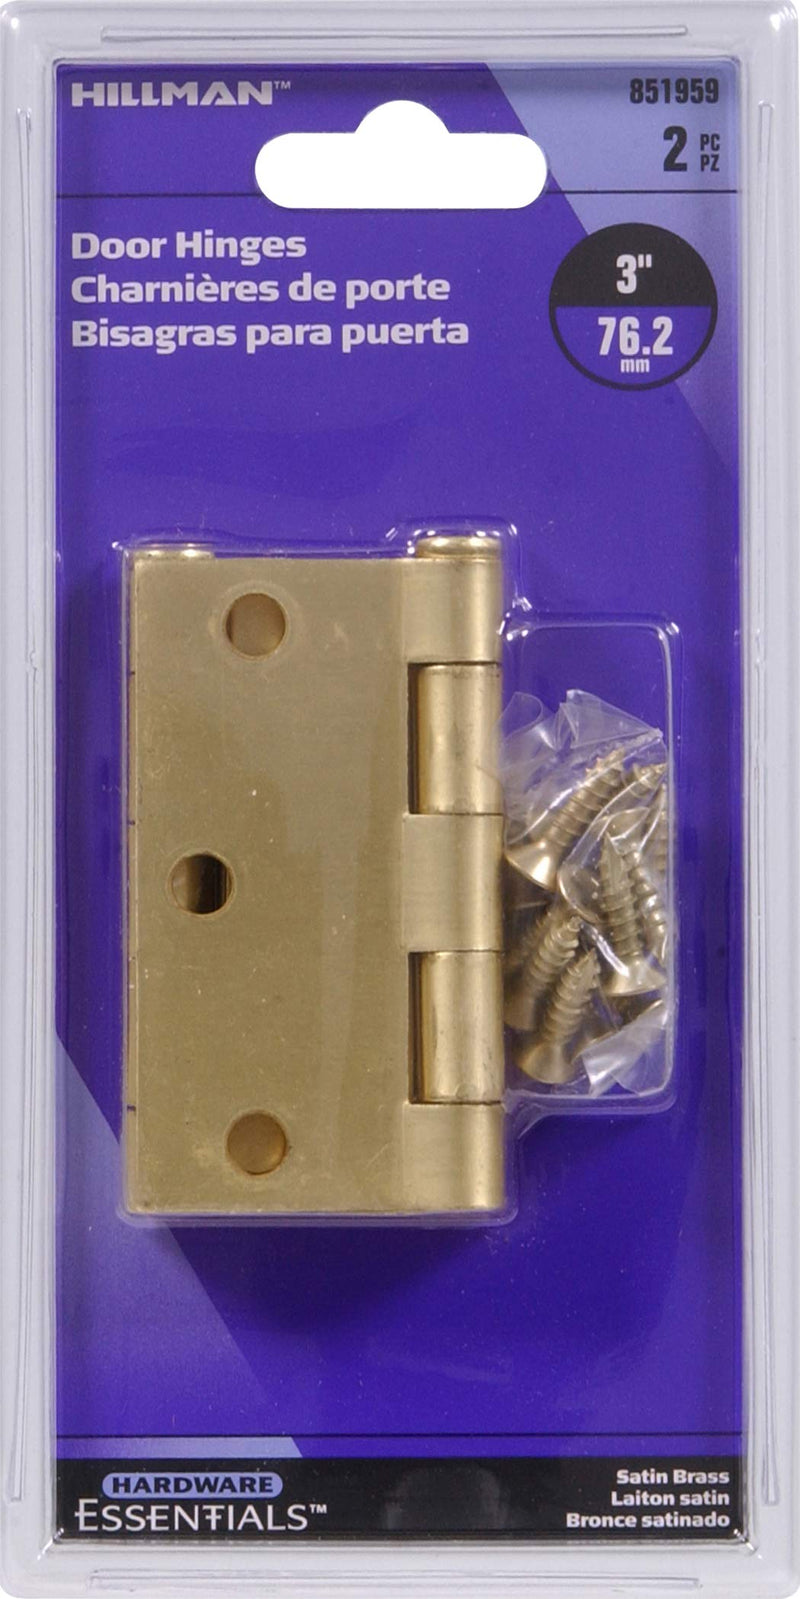 Hillman Hardware Essentials 851959 Residential Square Corner Door Hinges with Removable Pin Satin Brass 3" - 2 Pack - NewNest Australia